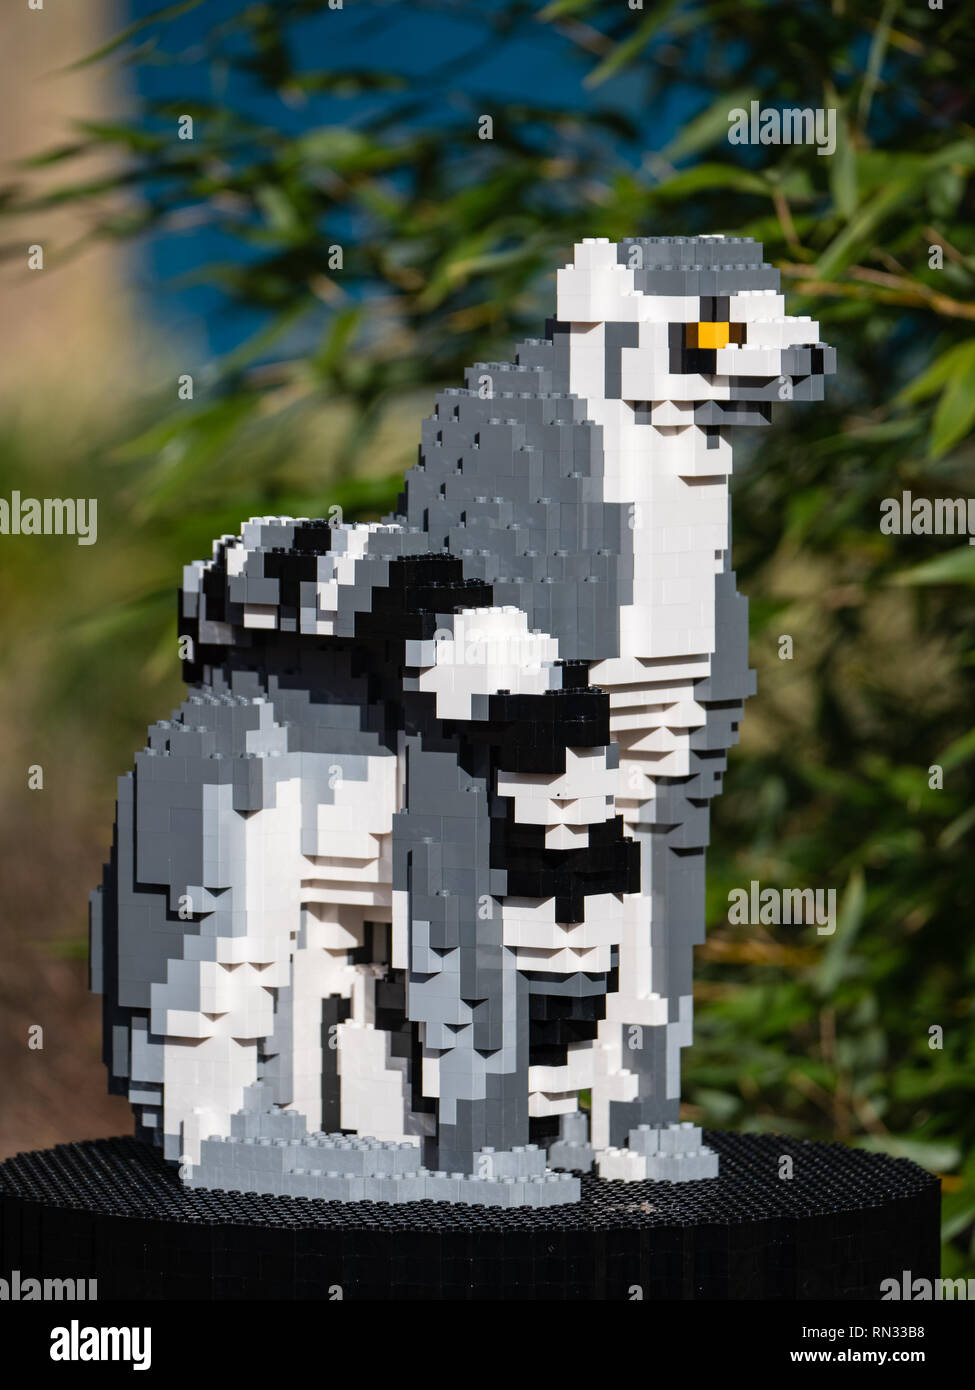 Ring-tailed lemur model, part of the Lego Brick Trail at Chester Zoo Stock Photo